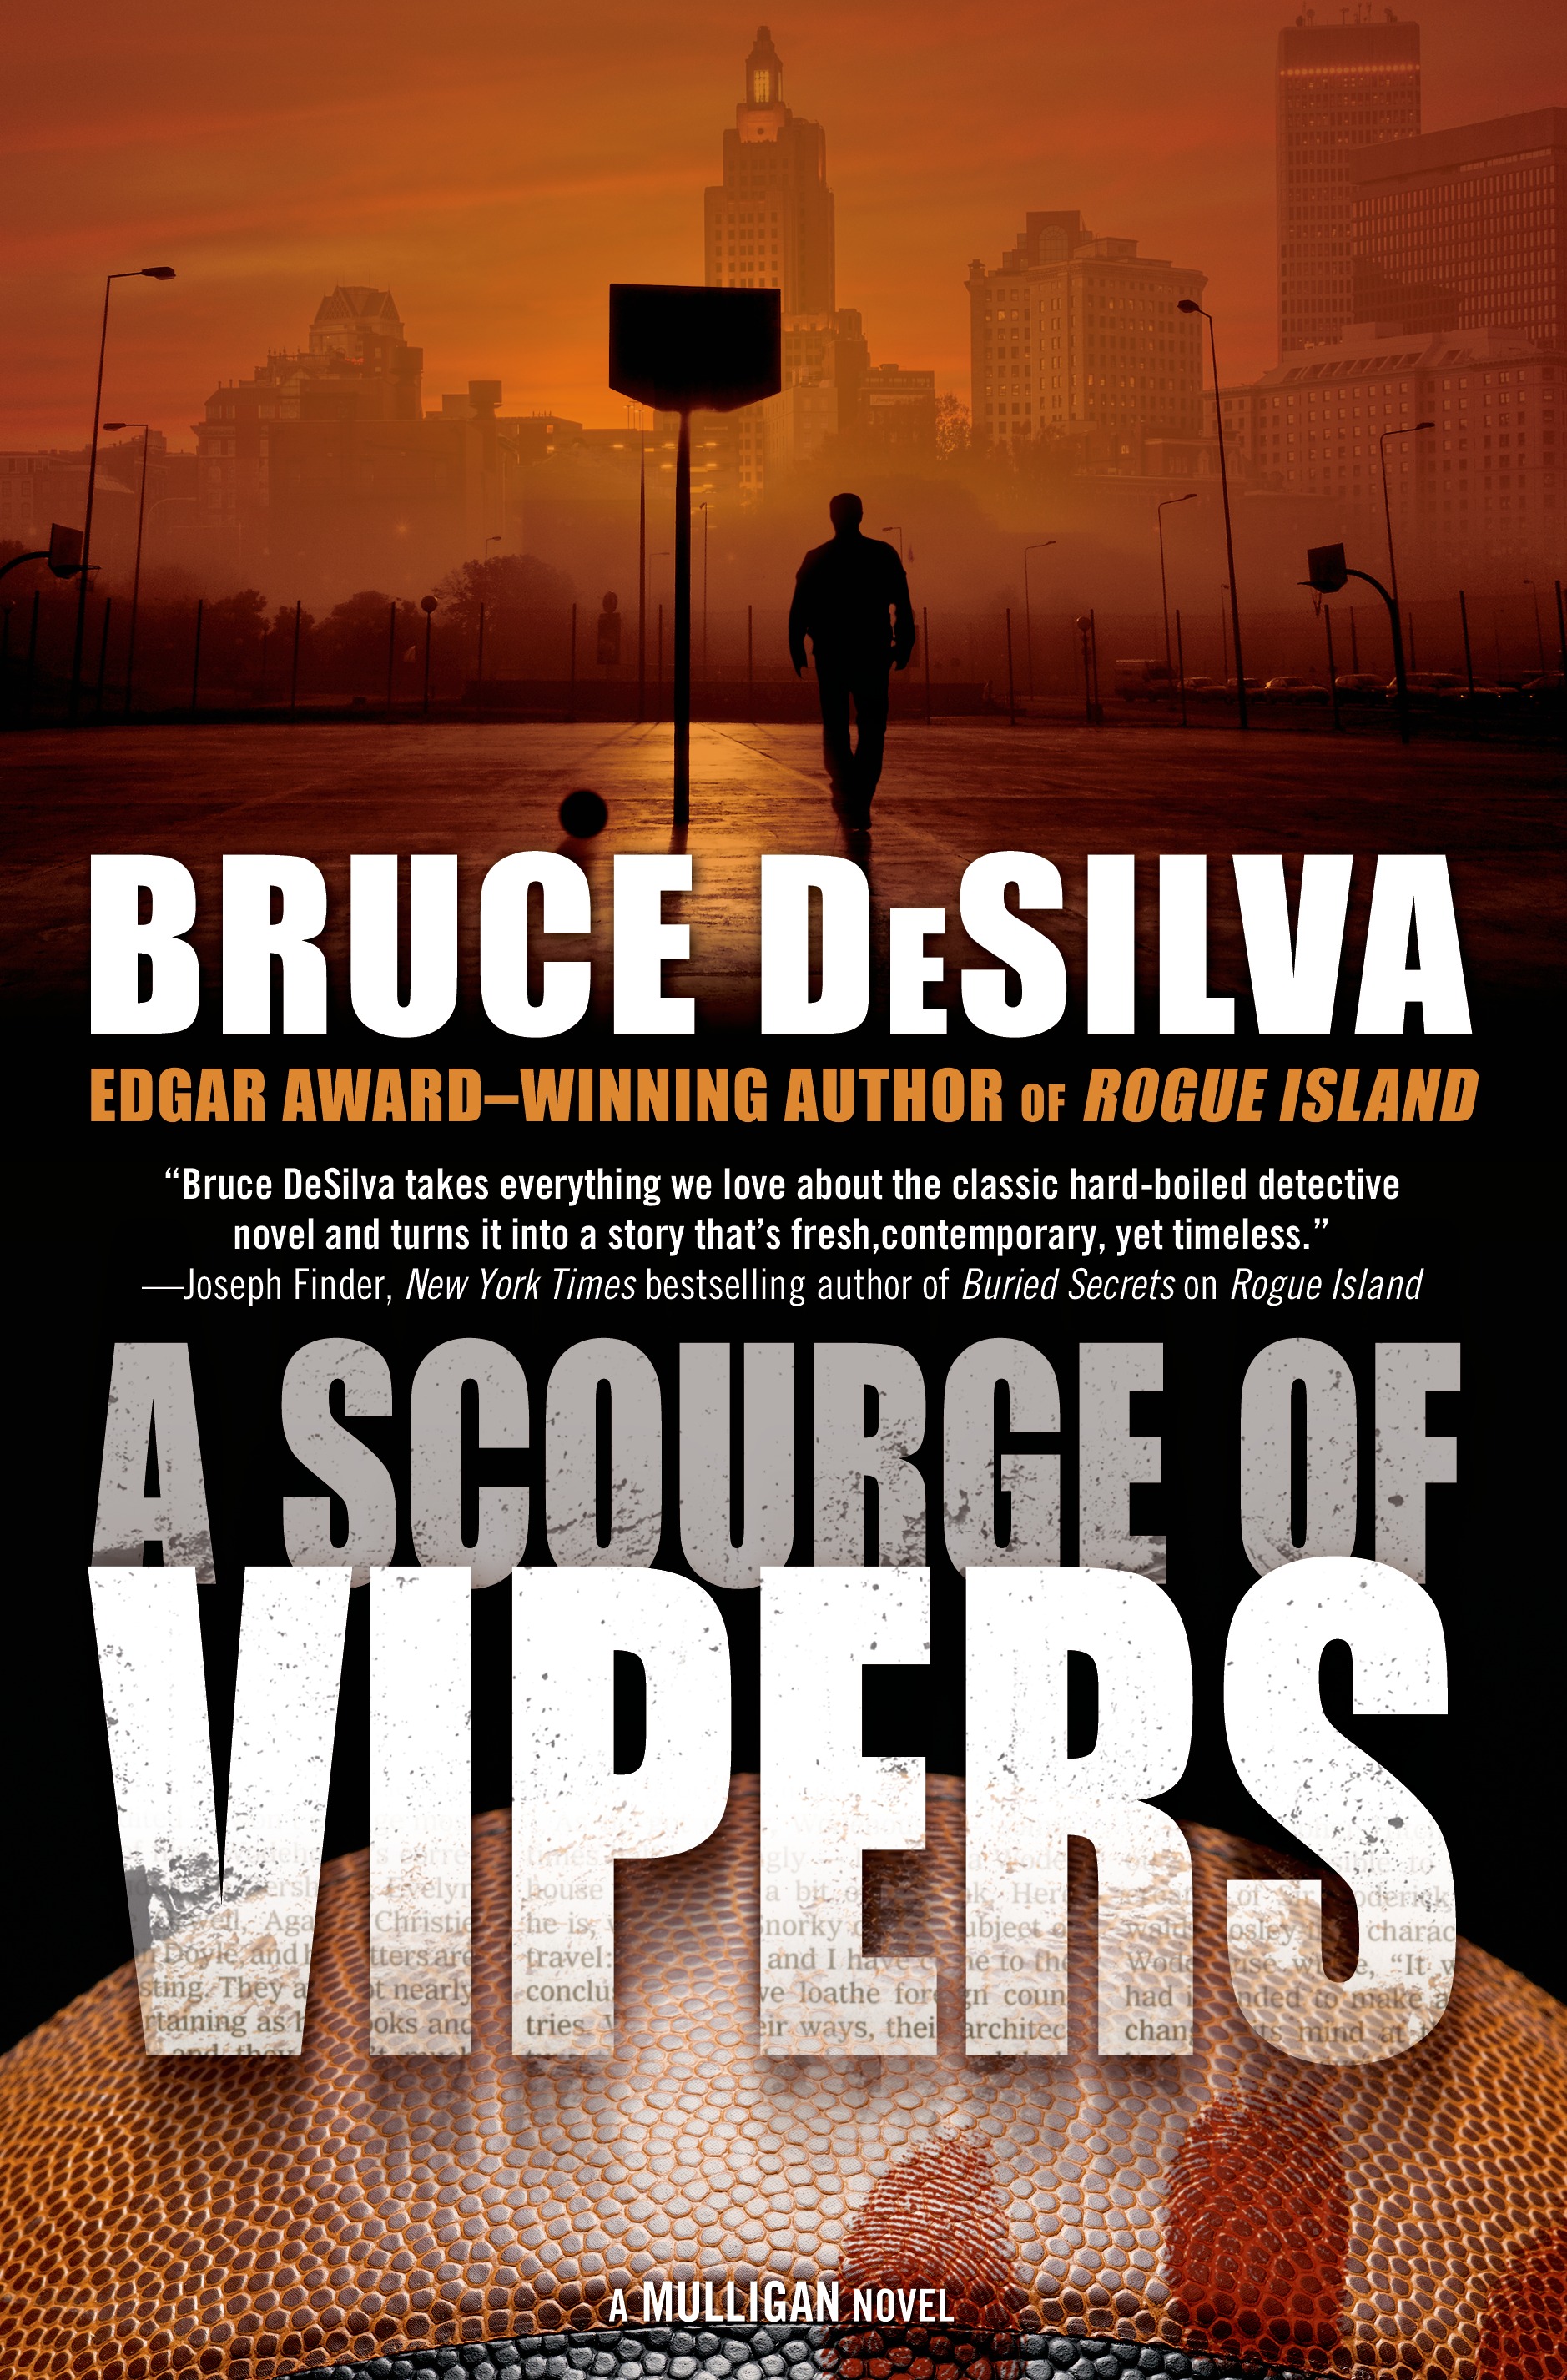 A Scourge of Vipers : A Mulligan Novel by Bruce DeSilva